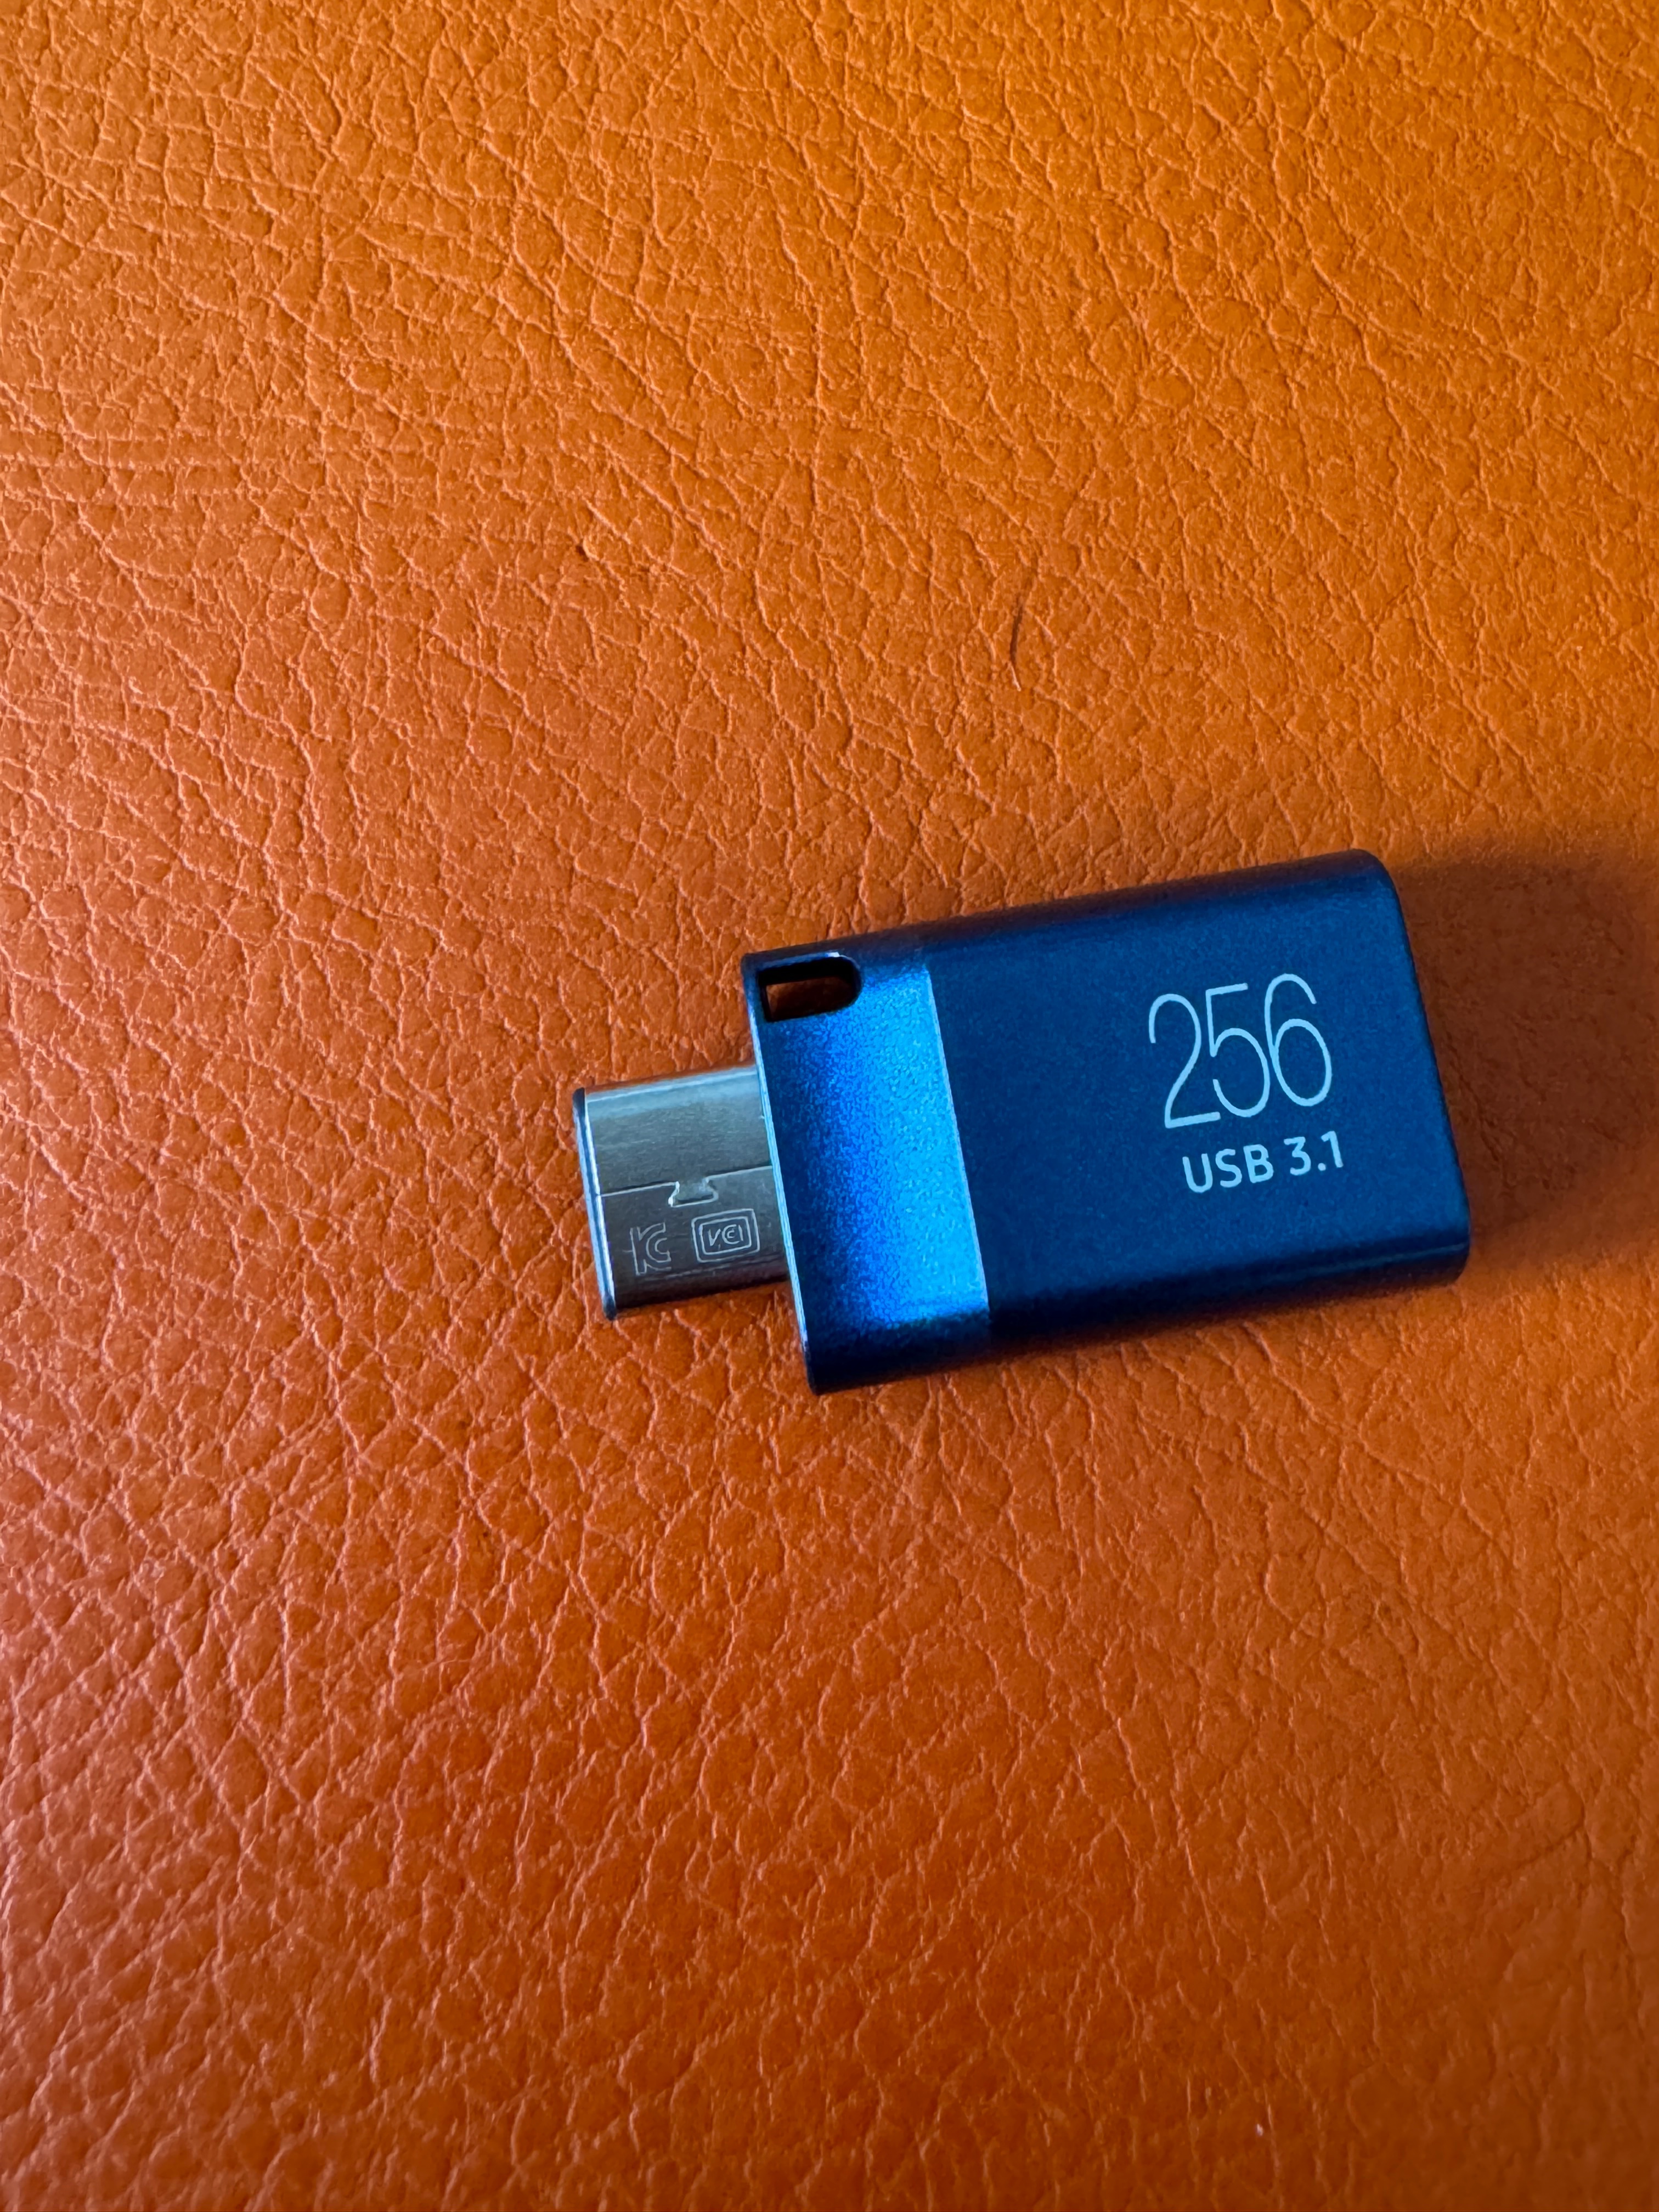 How to Use a USB Drive with an iPhone or iPad